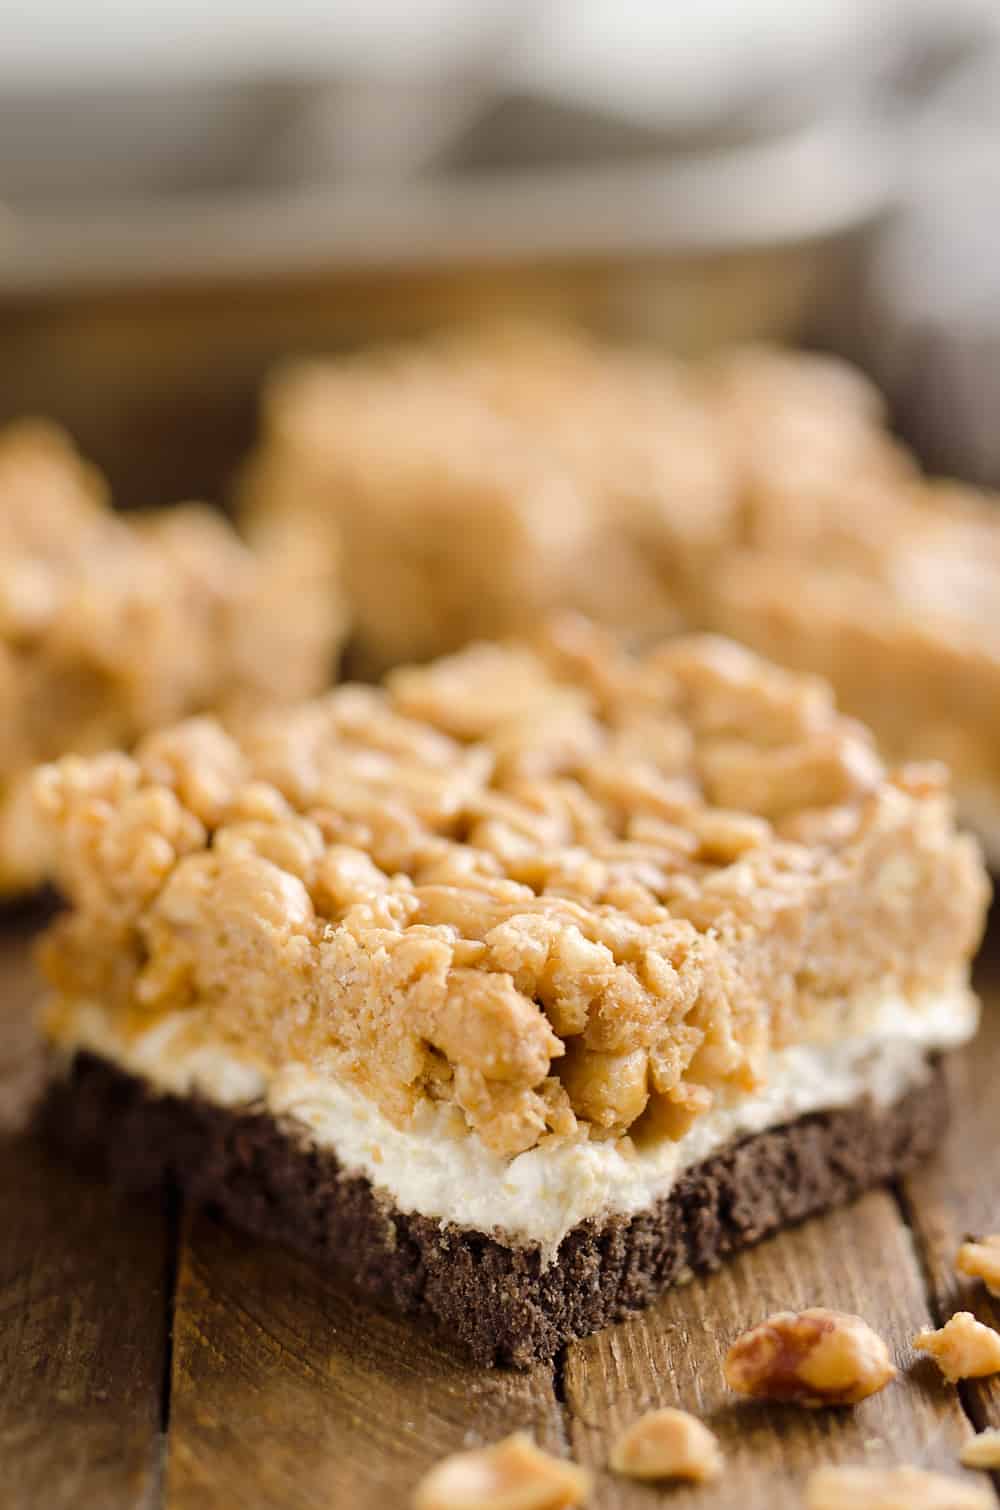 Crunchy Peanut Butter Marshmallow Bars are a sweet and salty dessert everyone will love! A chocolate crust is topped with marshmallows and a crunchy peanut butter and rice crispie mixture for a delicious treat.